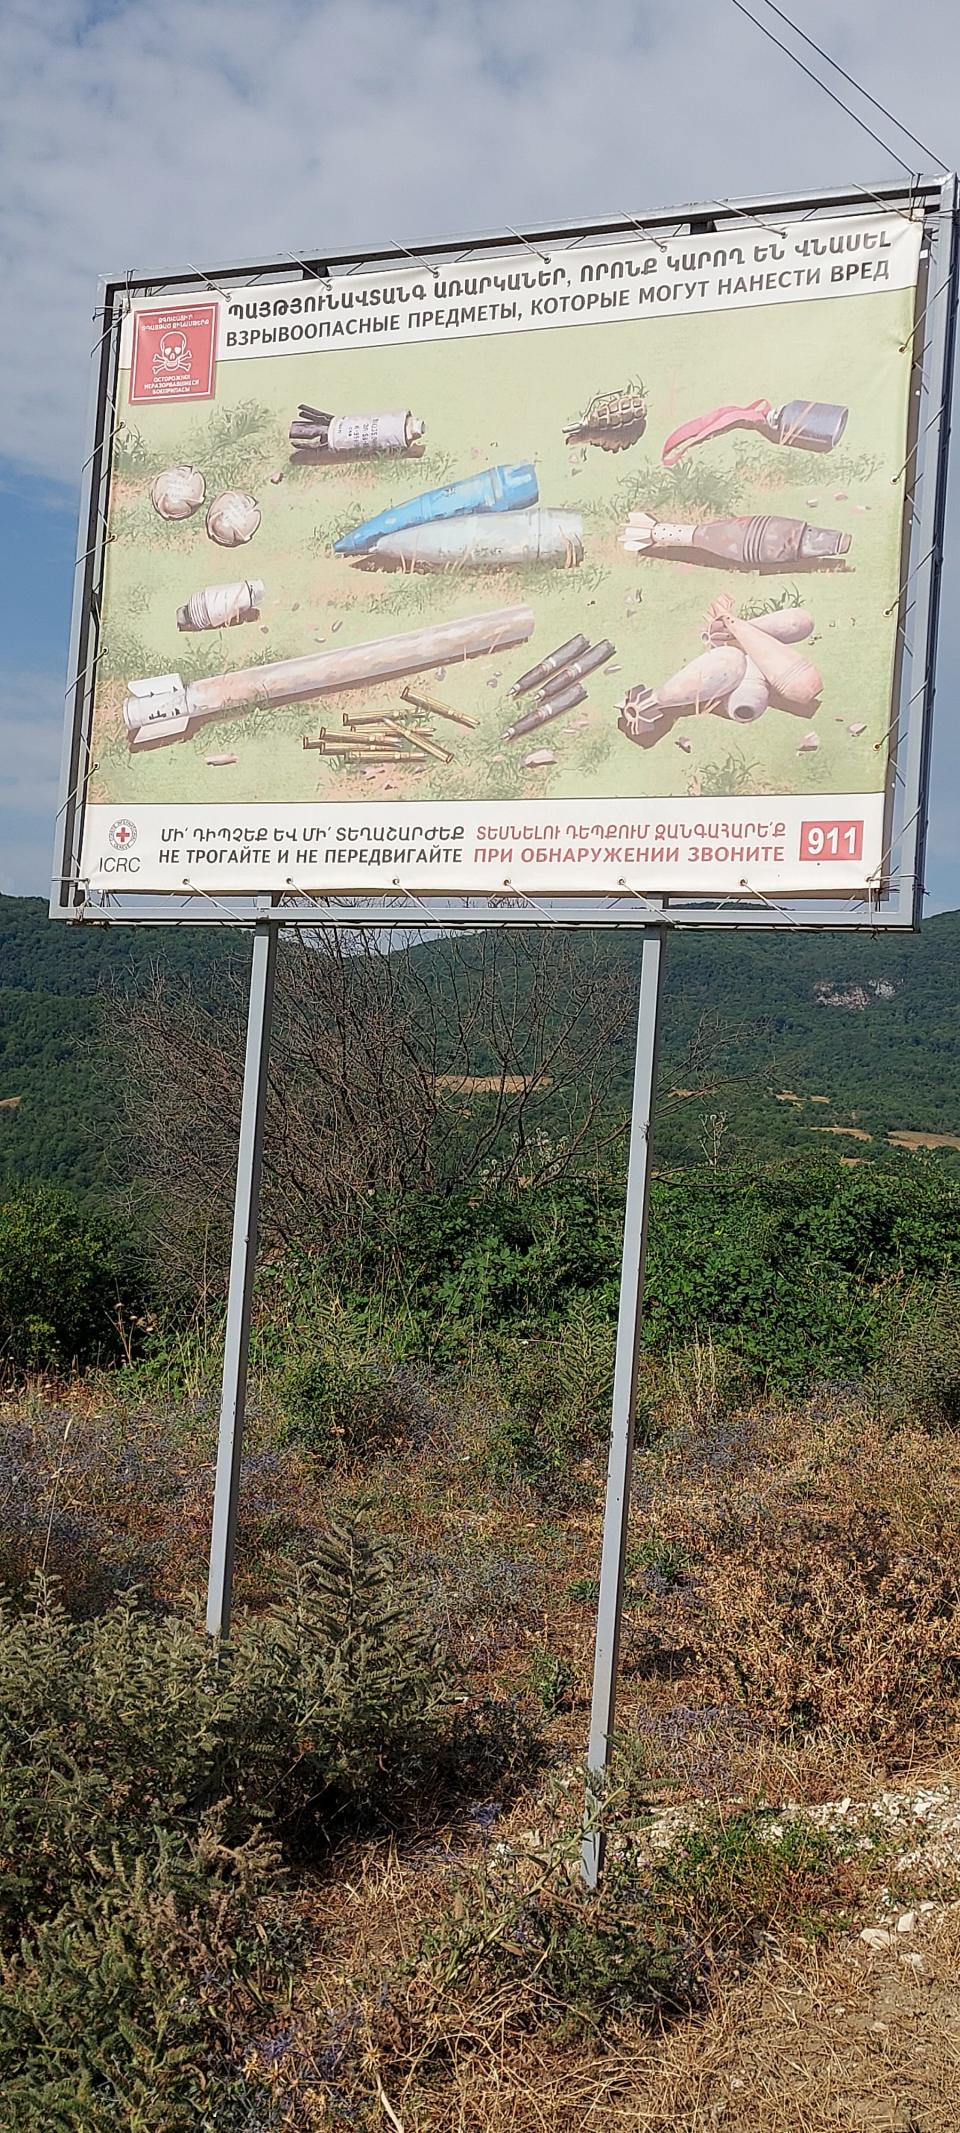 A road sign in Nagorno Karabagh warning the population of unexploded ordinance.